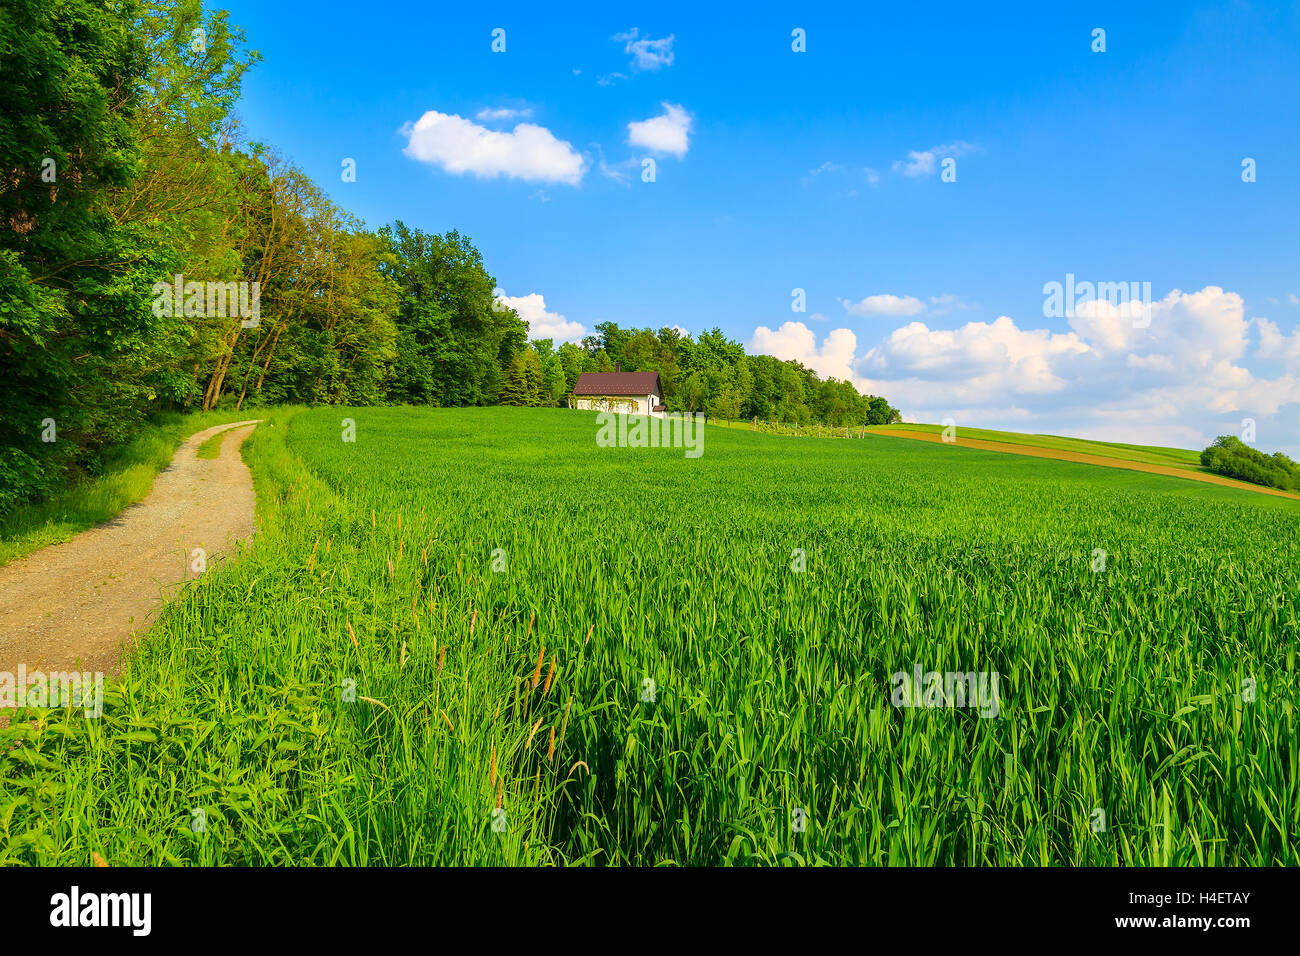 Road to house and green field in farming landscape of Burgenland, Austria Stock Photo